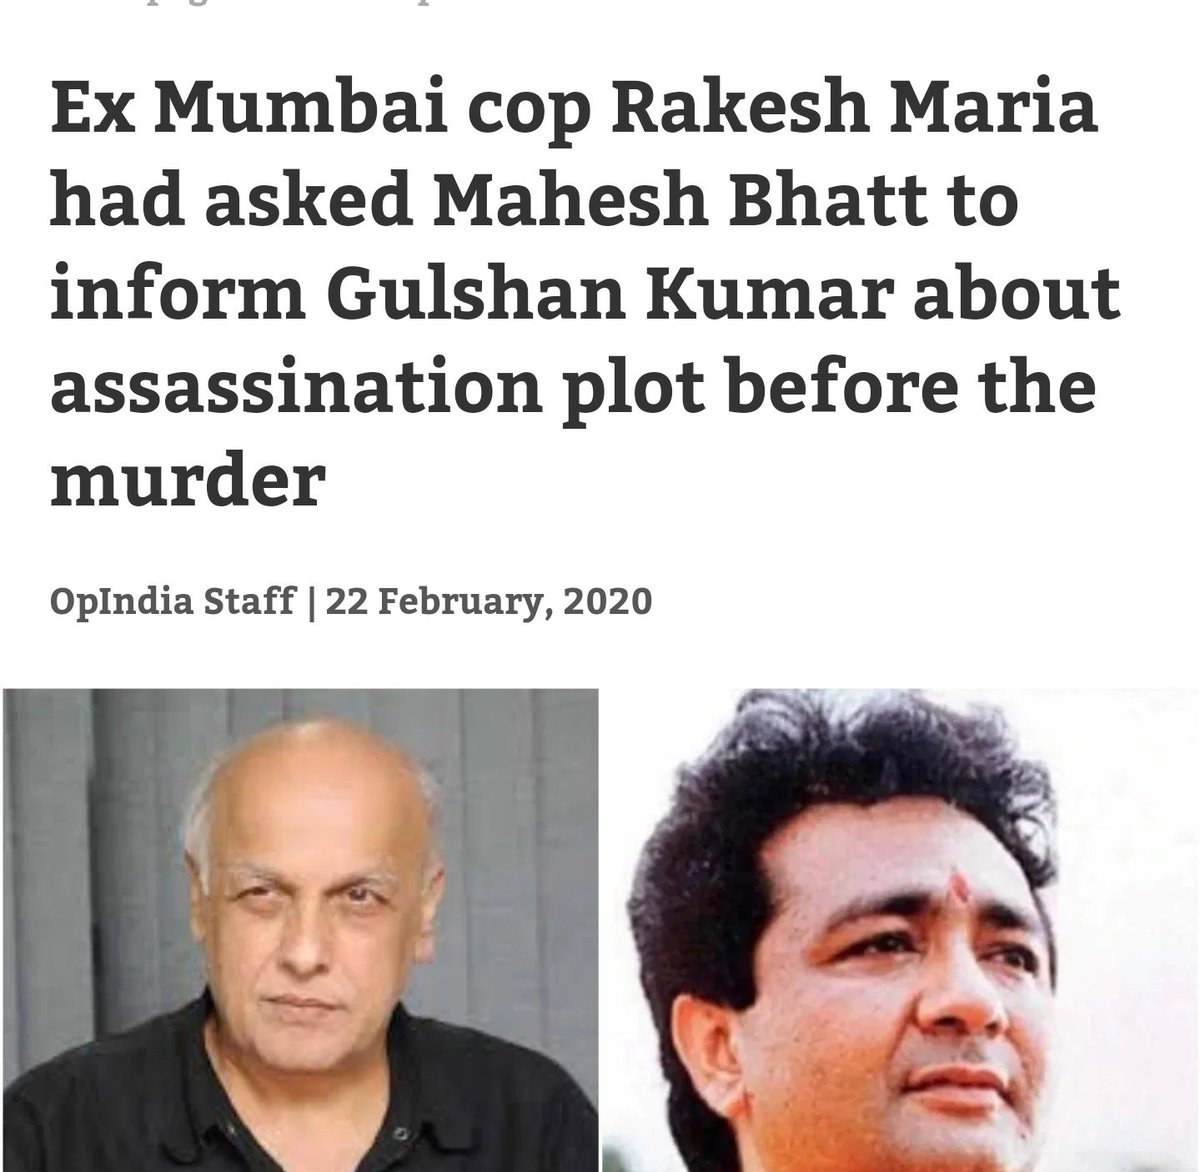  Mahesh Bhatt knew Gulshan Kumar's would be Murdered. Rakesh Maria, ex Commissioner of M Police had mentioned -Meme Police was aware of Gulshan's Murder Conspiracy. It was all a great planning from several months & Underw*rld don was hiredDID BHATT CONSPIRE SSR MURDER2/N